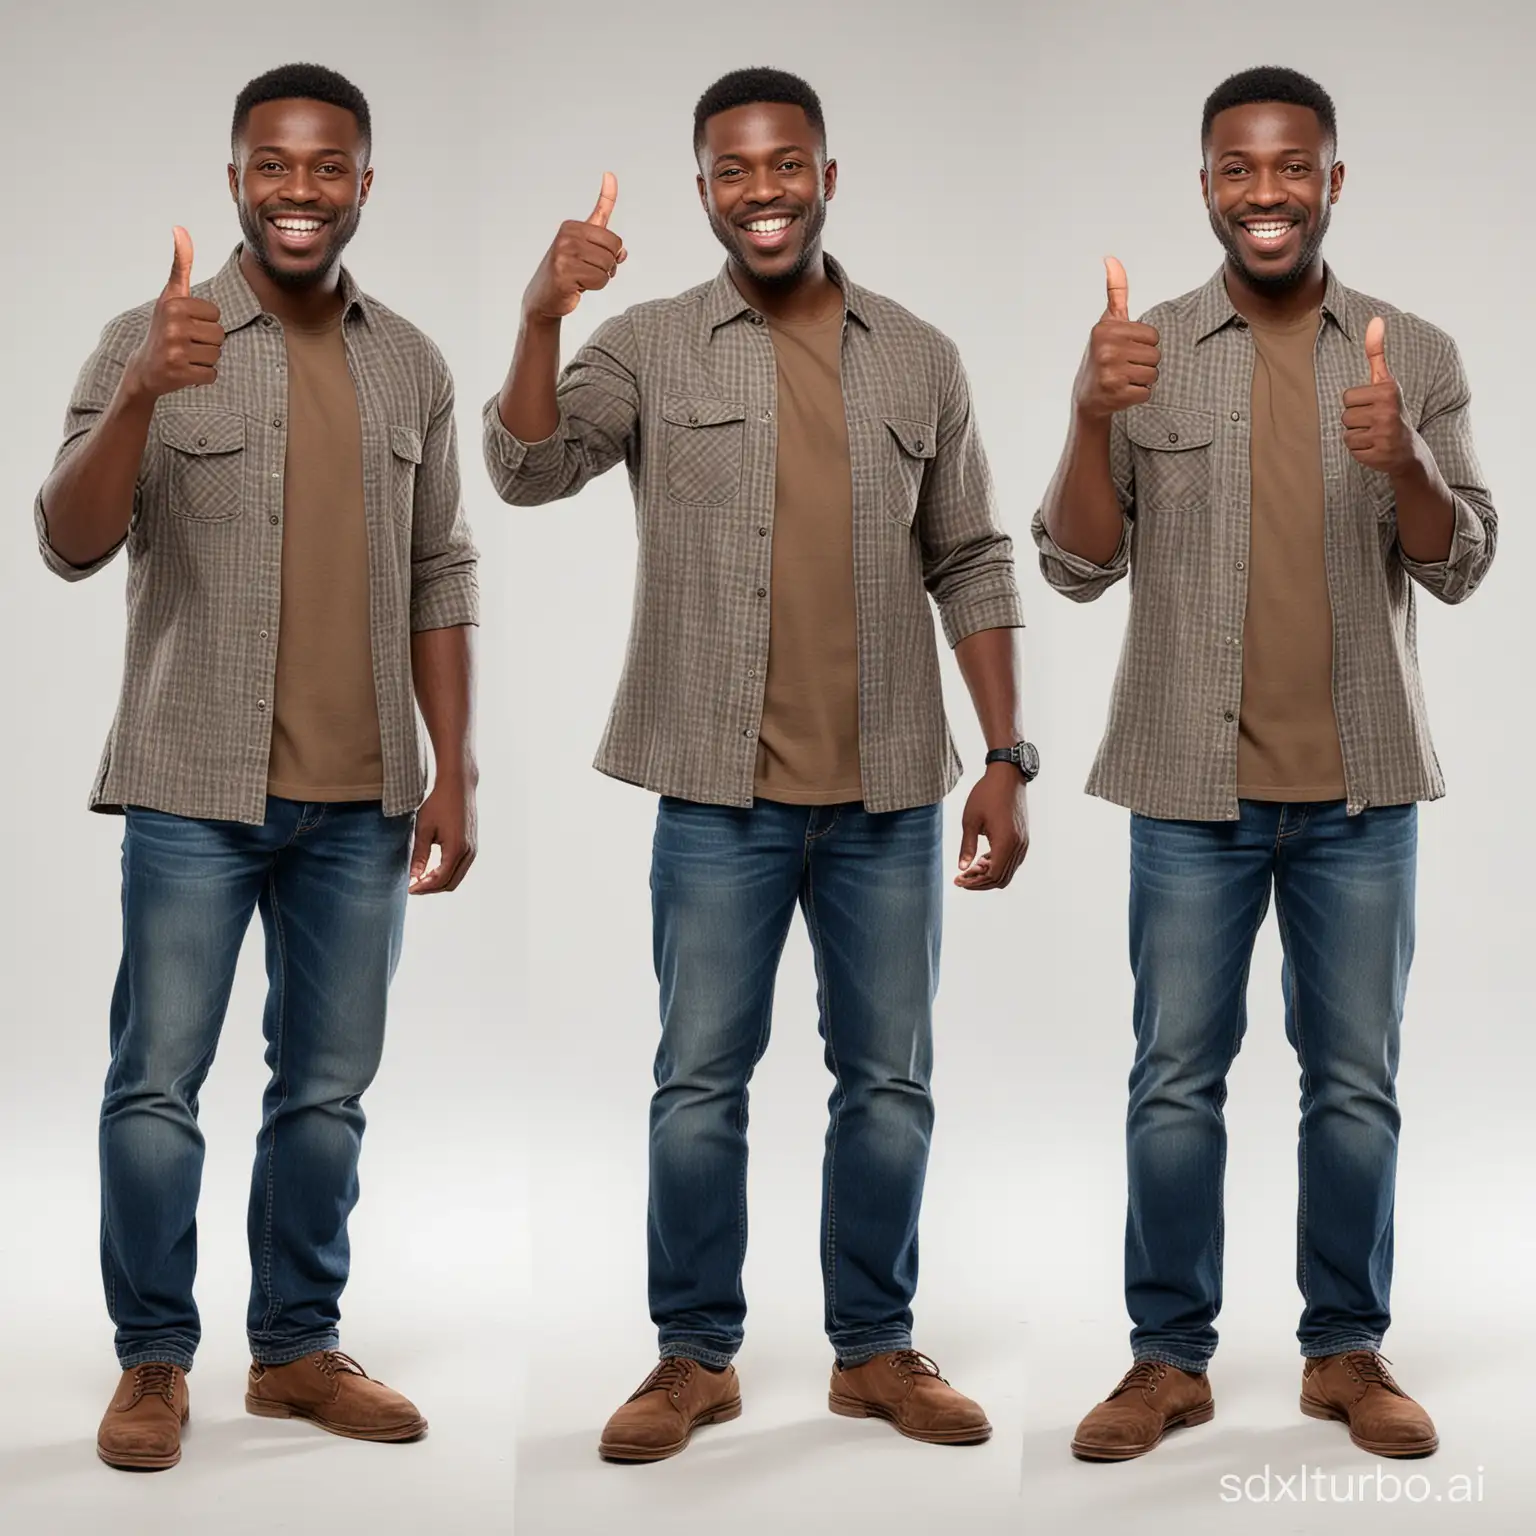 Generate two Nigerian Black men, different face,different cloths,aged between 30 to 40, standing upright and each raising a thumbs-up gesture, portrayed in full-body authentic photographs in PNG format with a transparent background.